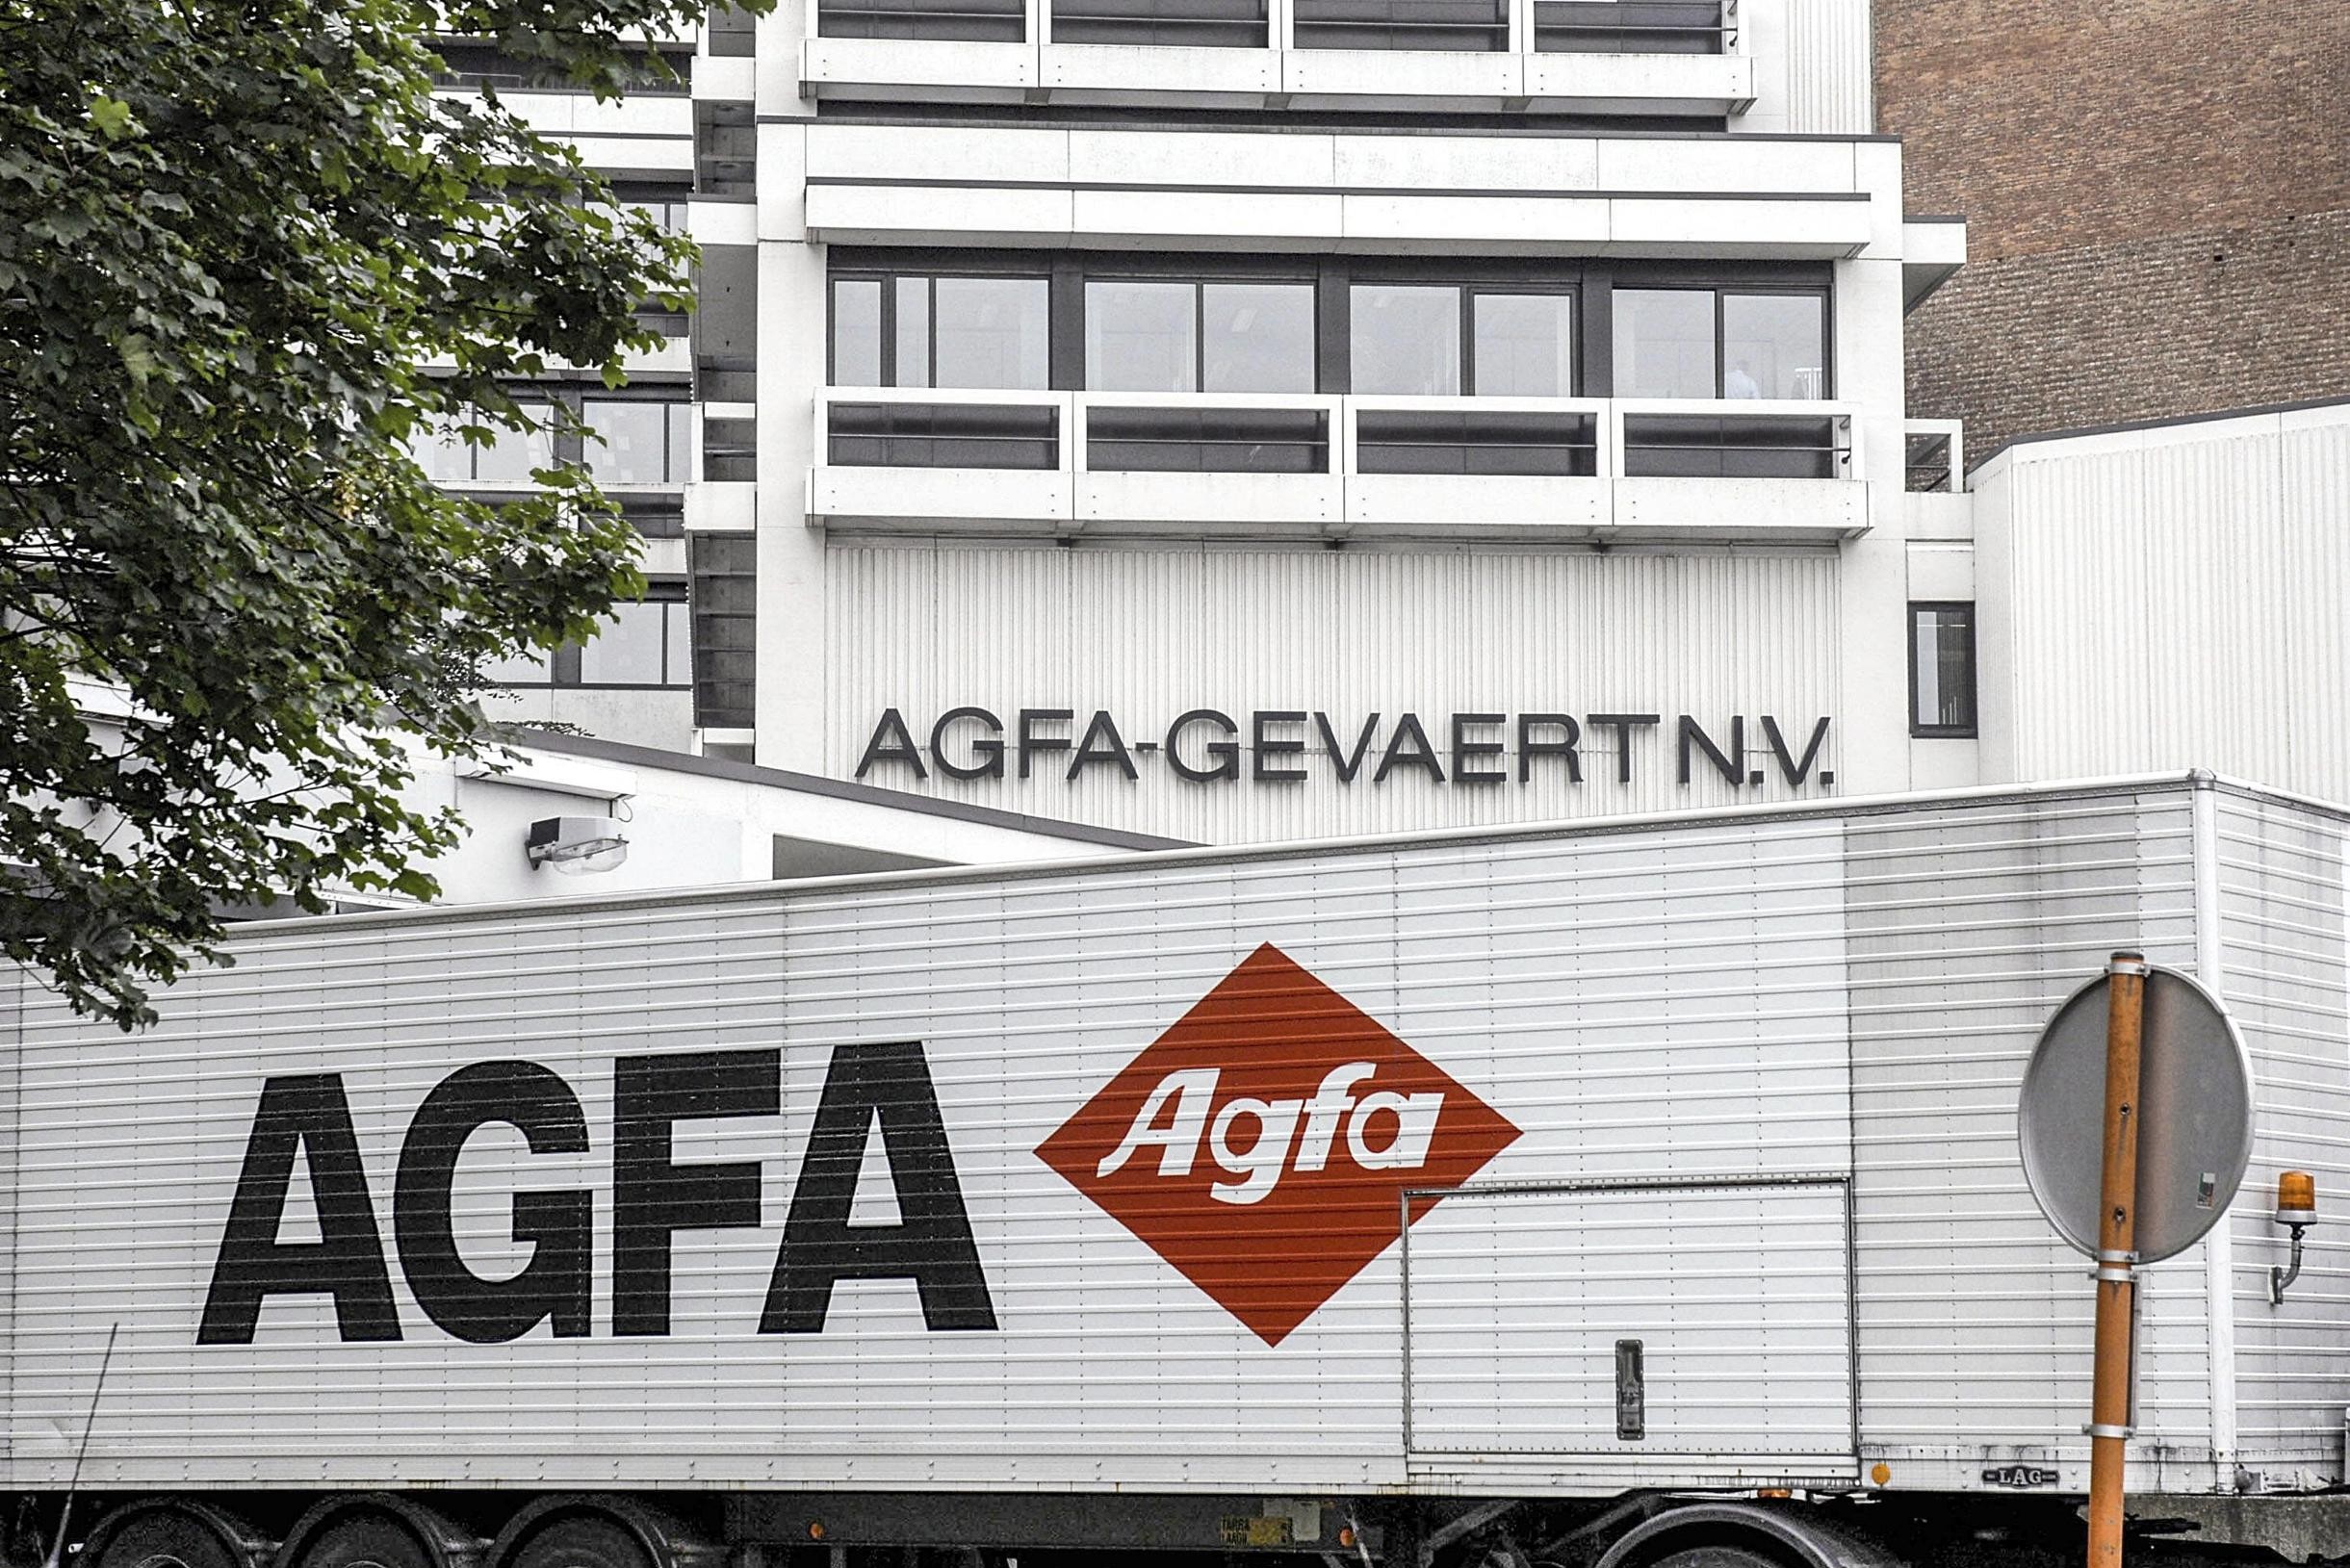 Trade unions at Agfa prepare for strike (Antwerp)